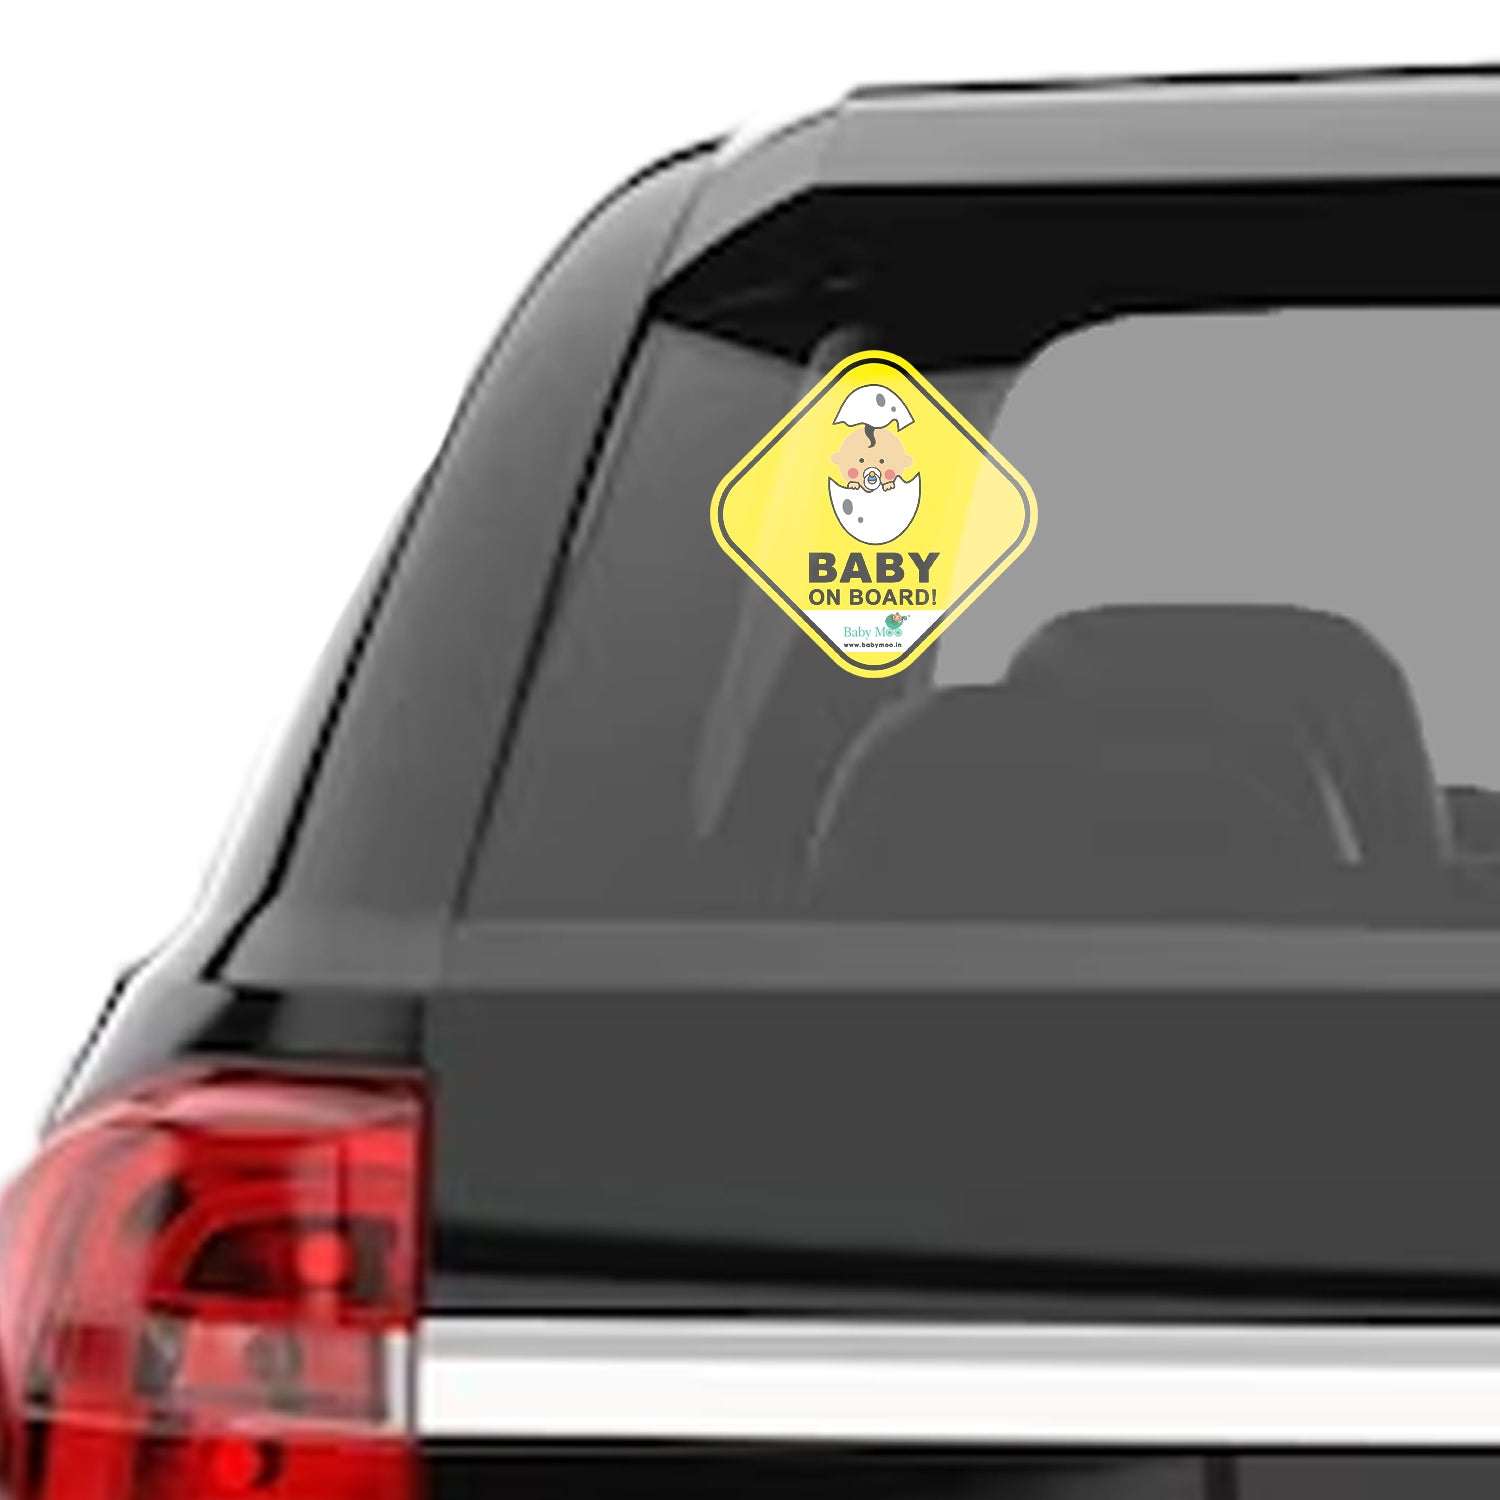 Baby Moo Car Safety Sign Snoozing Angel Baby On Board With Suction Cup Clip 2 Pack - Yellow - Baby Moo